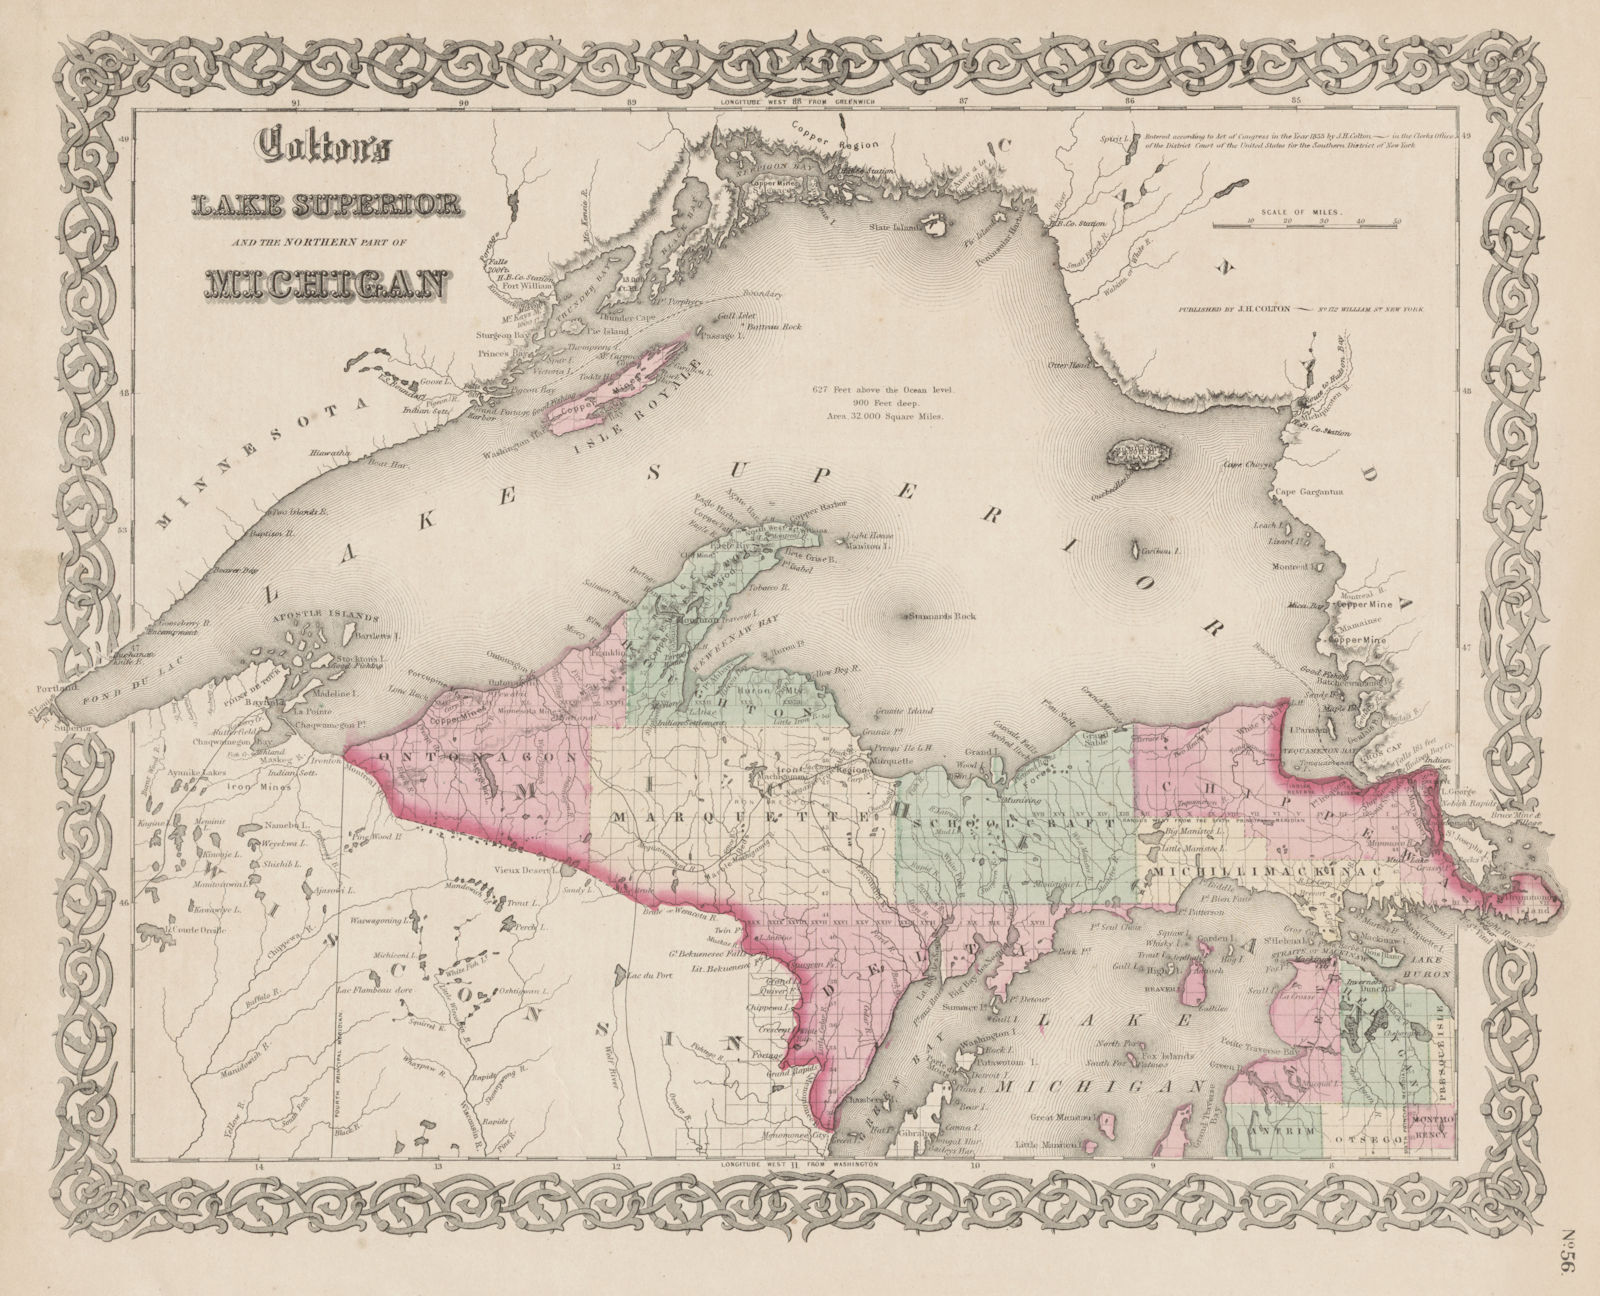 "Colton's Lake Superior and the northern part of Michigan". US state map 1863